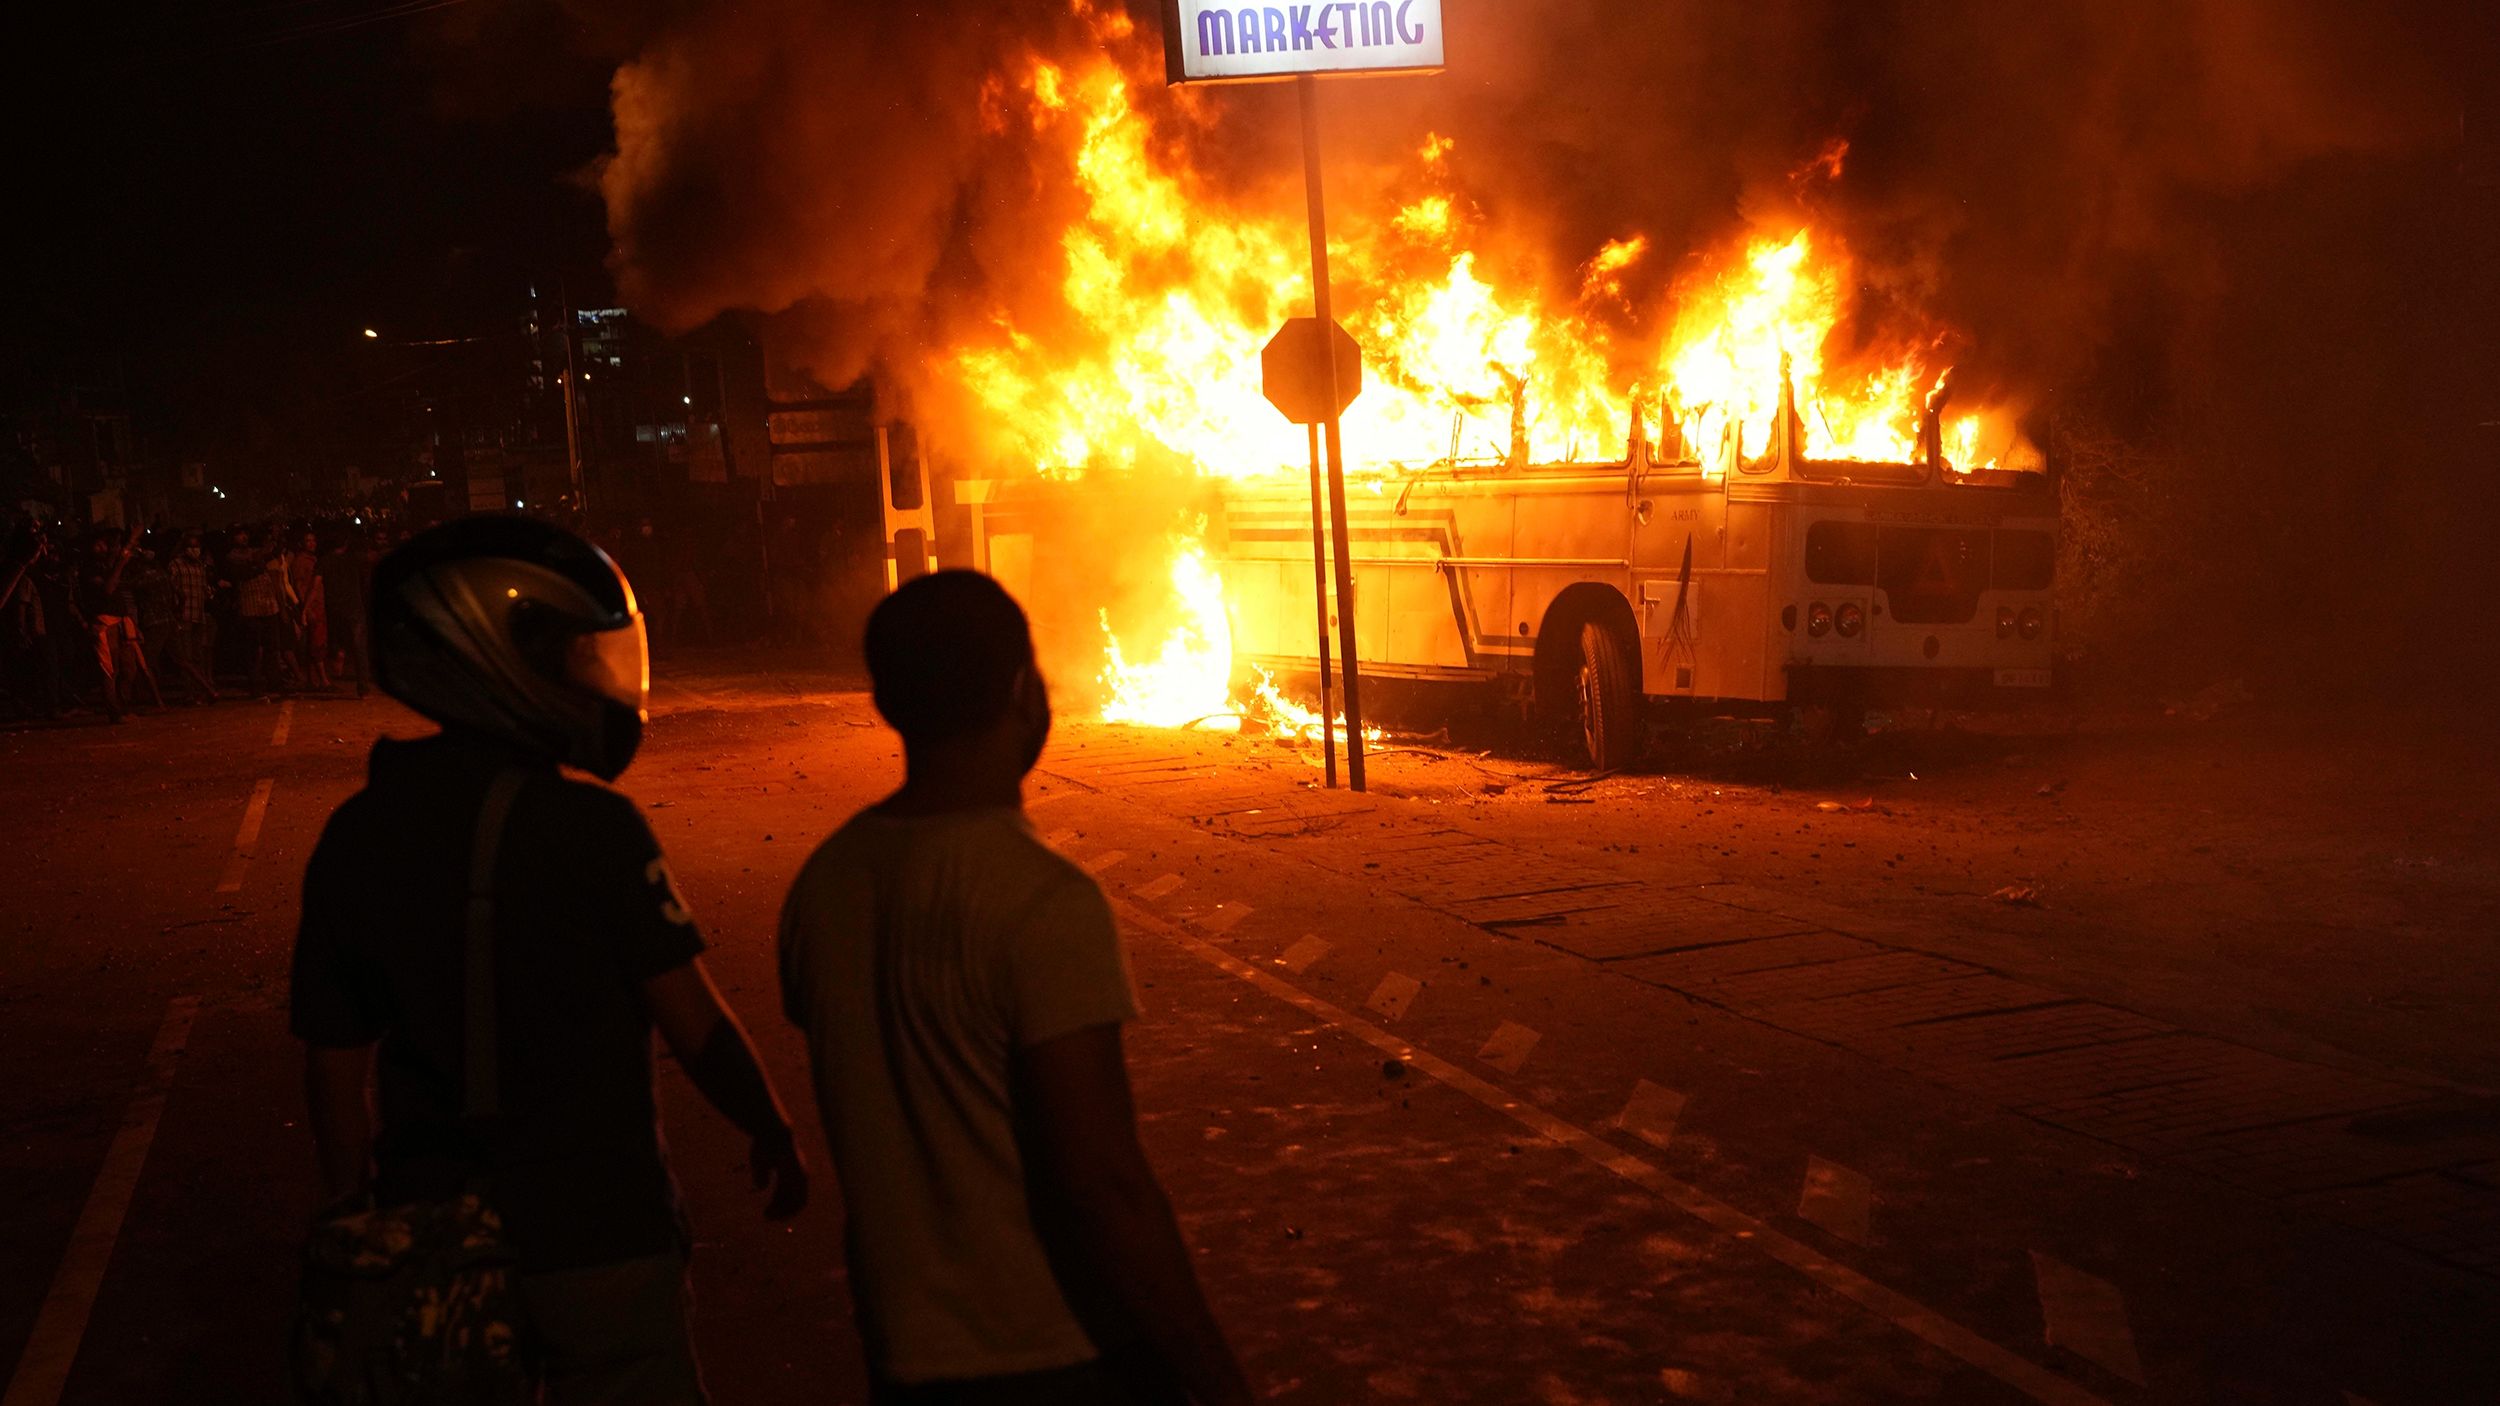 Sri Lankans watch a bus on fire during a protest outside the President's private residence on the outskirts of Colombo, on April 1, 2022.